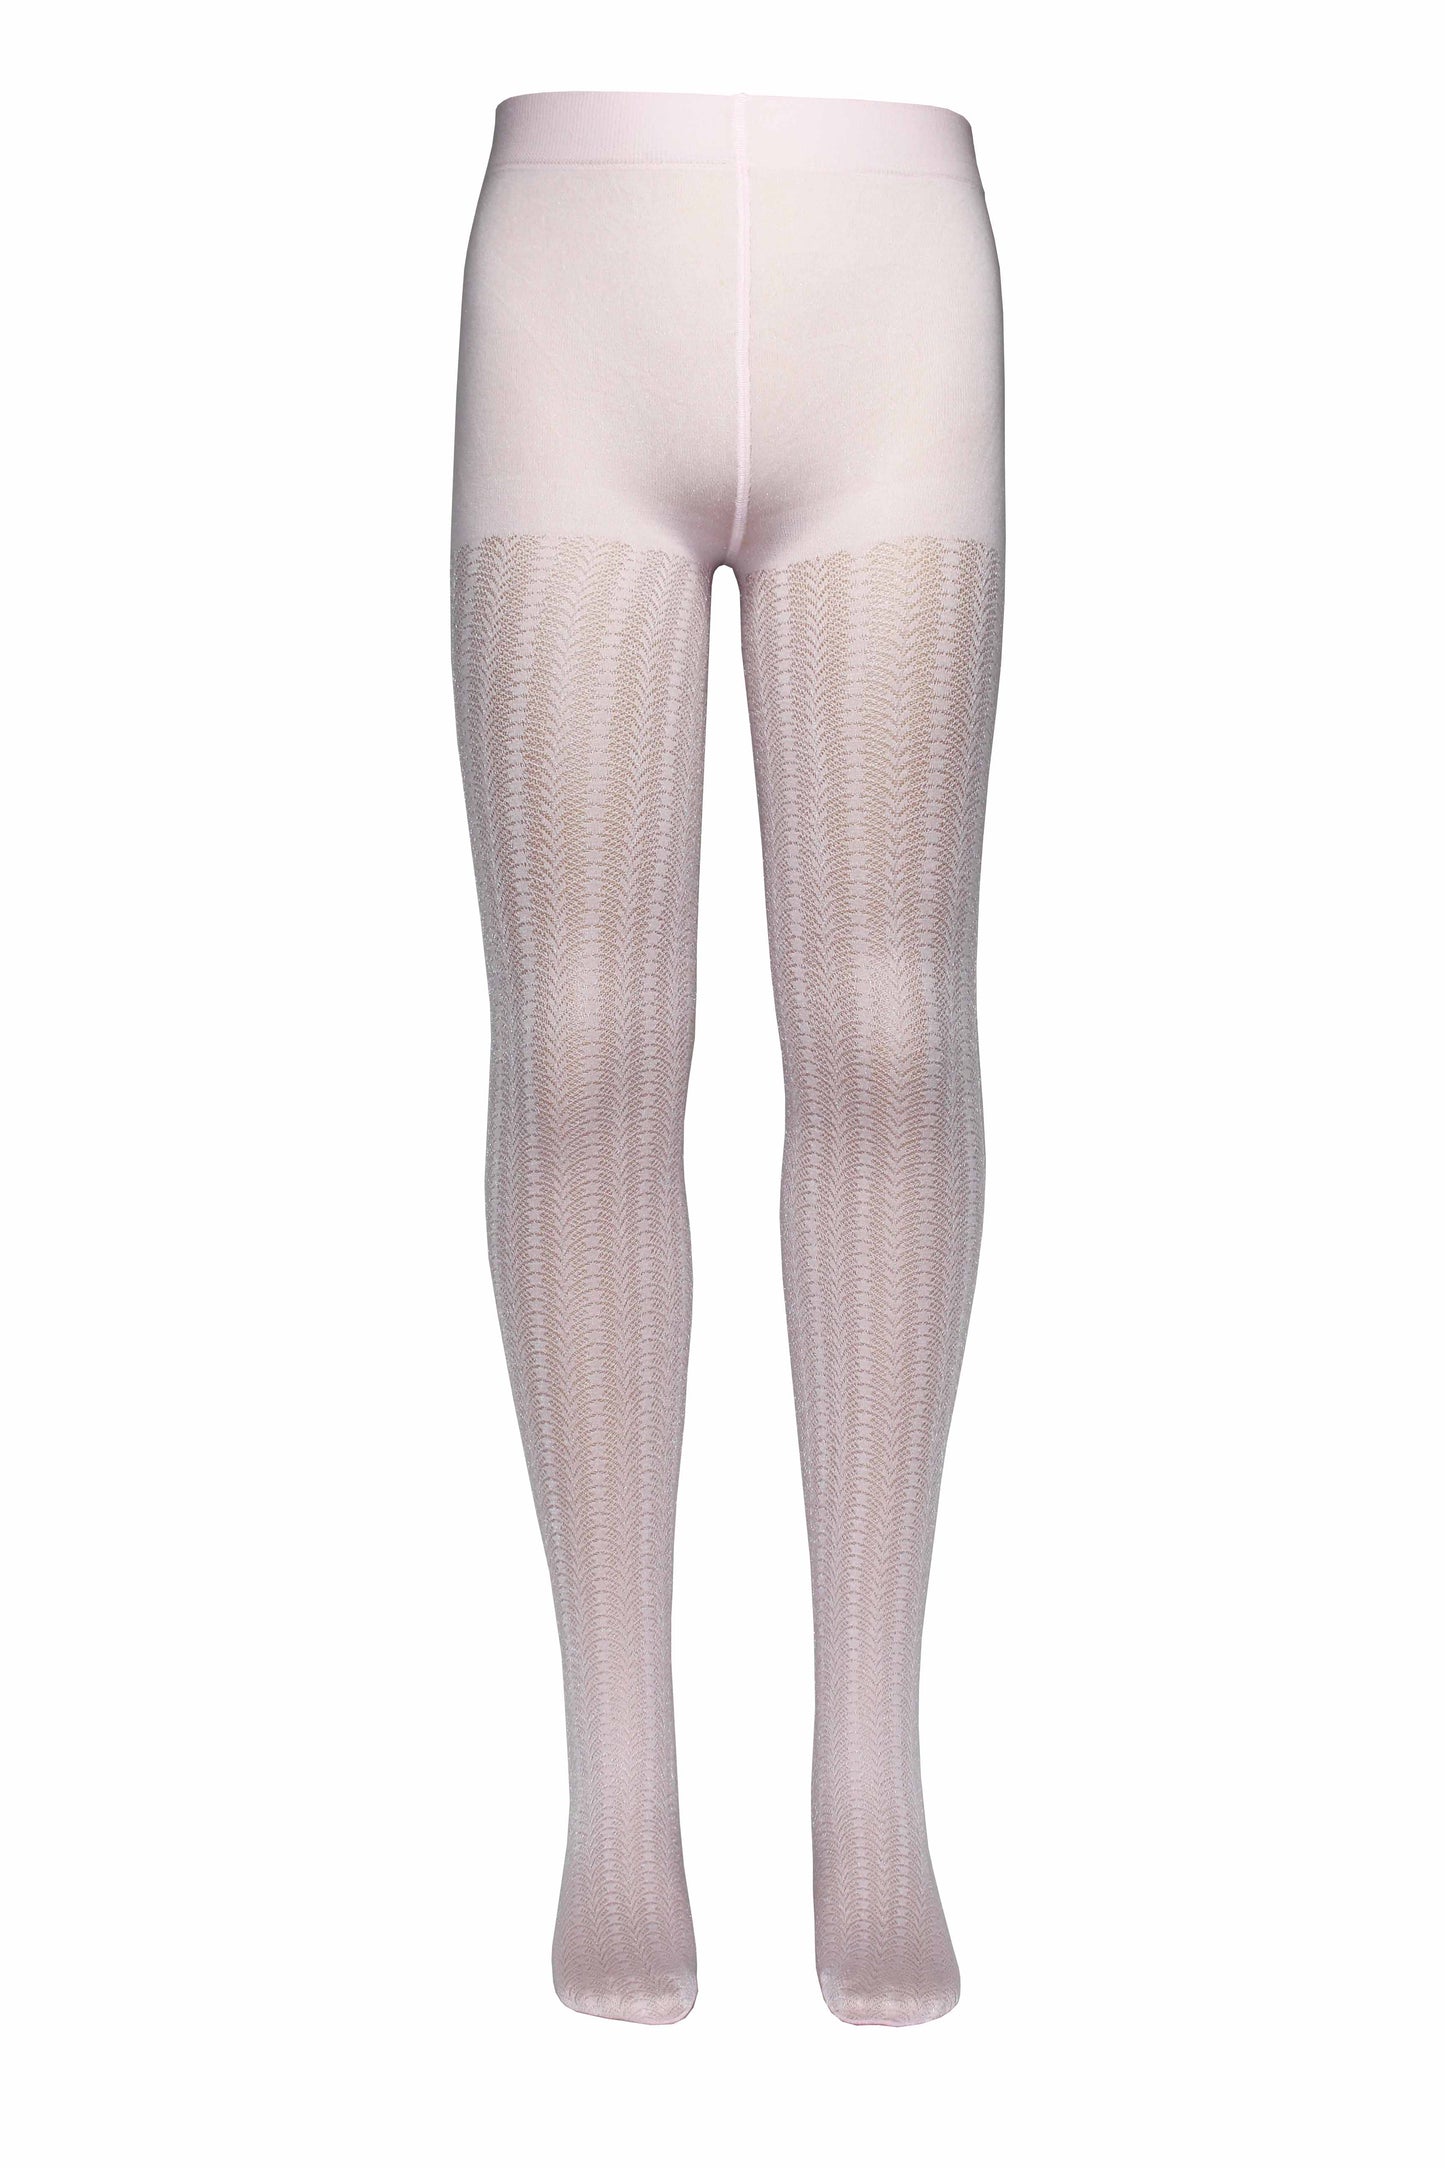 Omsa Serenella Delice Kid's Tights - Light pink / rosa semi opaque children's fashion tights with a woven circular linear lace style pattern.